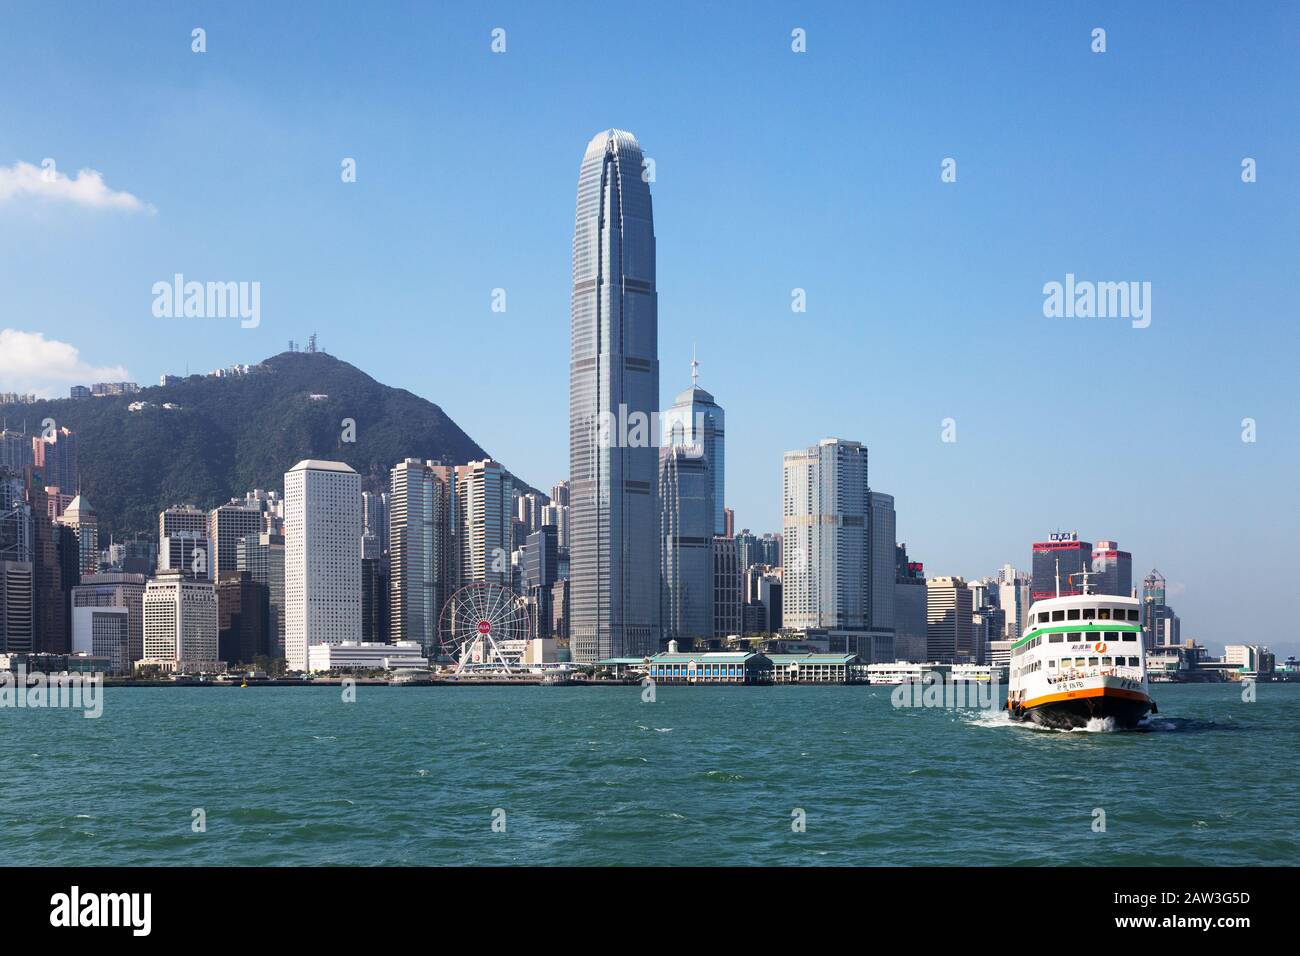 Hong Kong Harbour - a ferry making its way across Victoria Harbour on a sunny day, Hong Kong Harbour, Hong Kong Asia Stock Photo